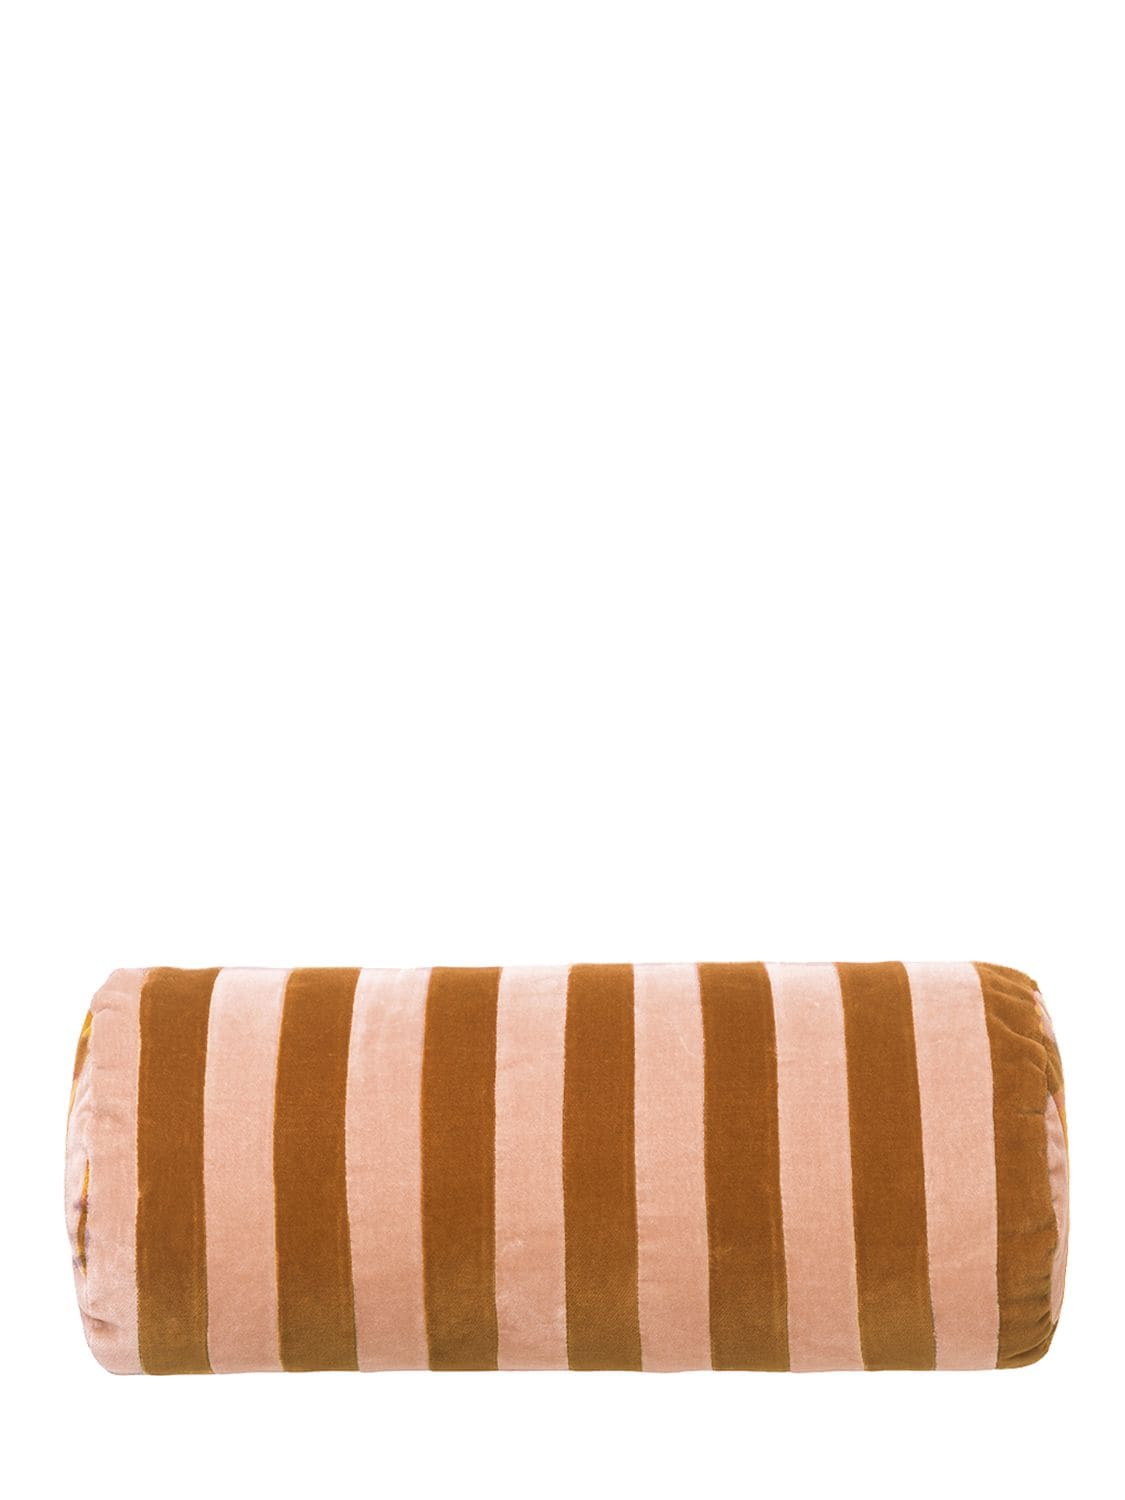 Christina Lundsteen Striped Bolster In Pink